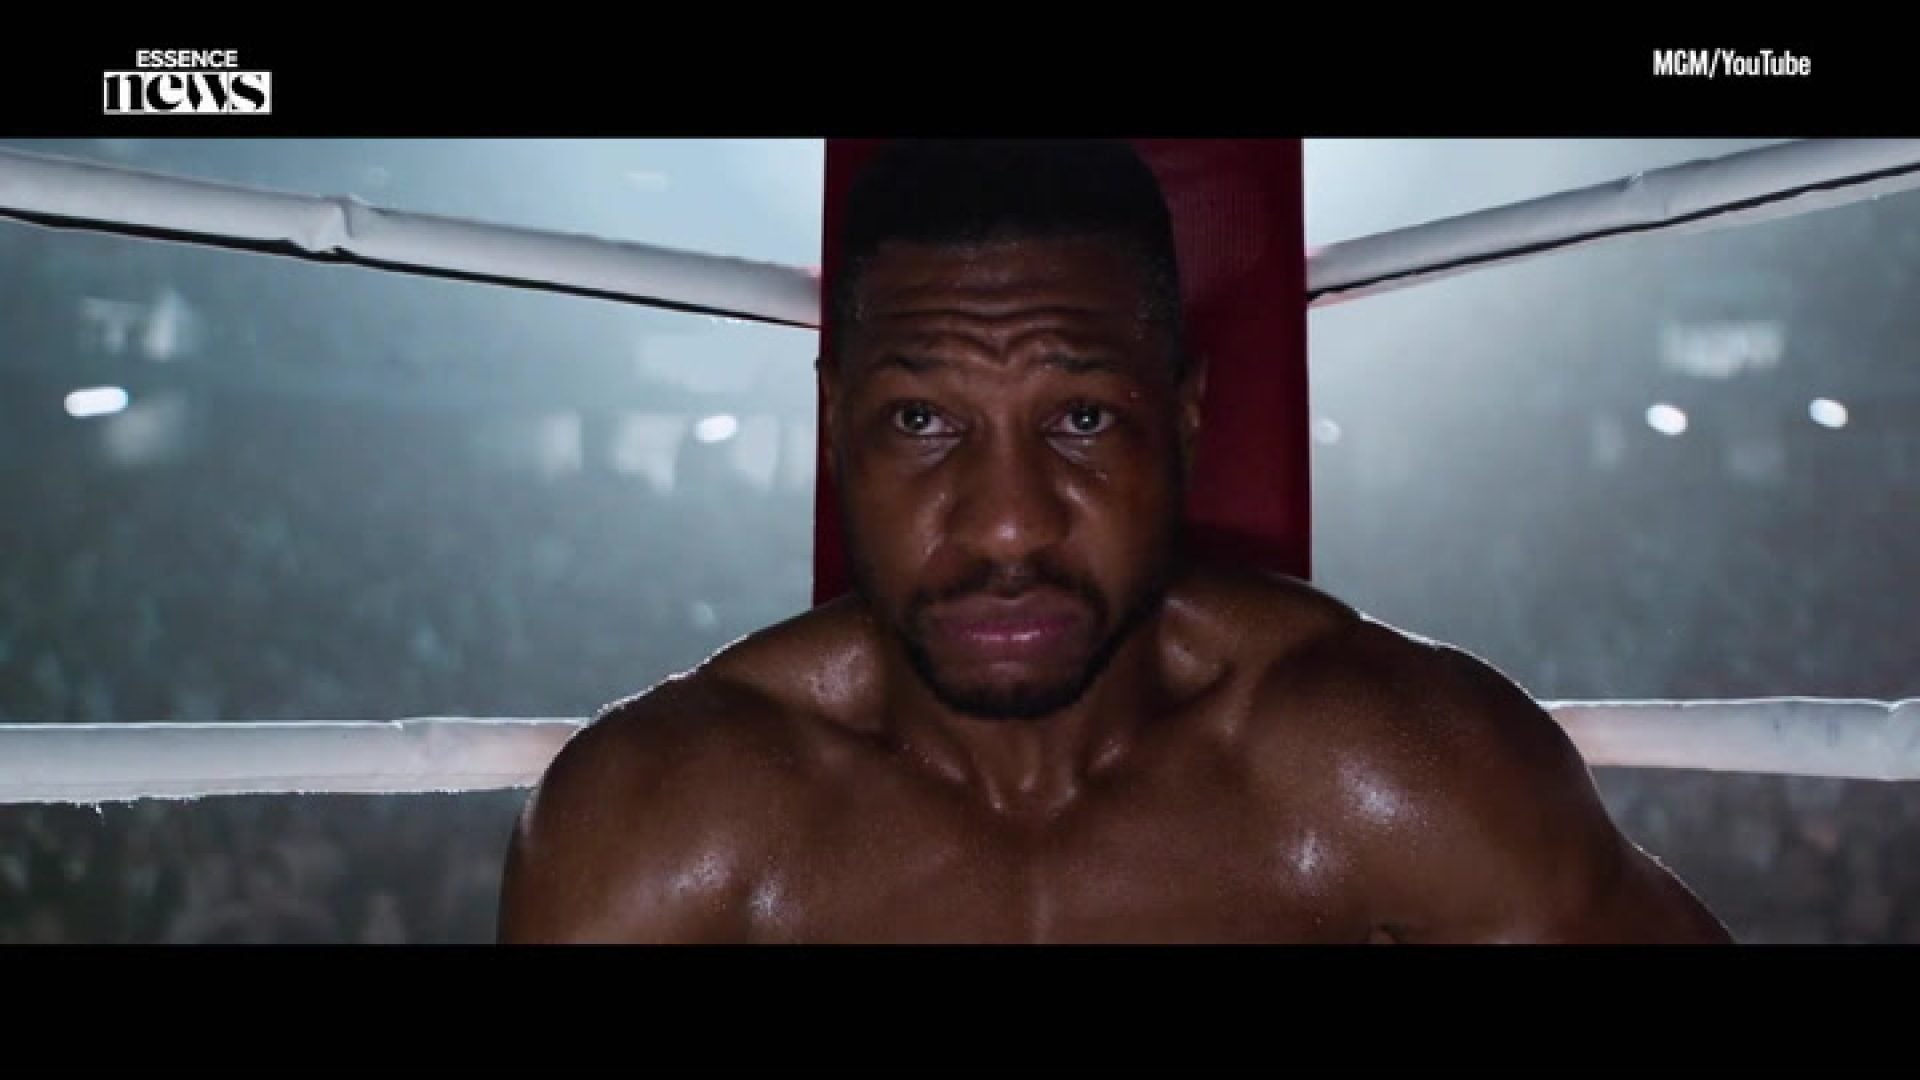 WATCH: Jonathan Majors on the ‘Intense’ Days While on the Set of ‘Creed III’